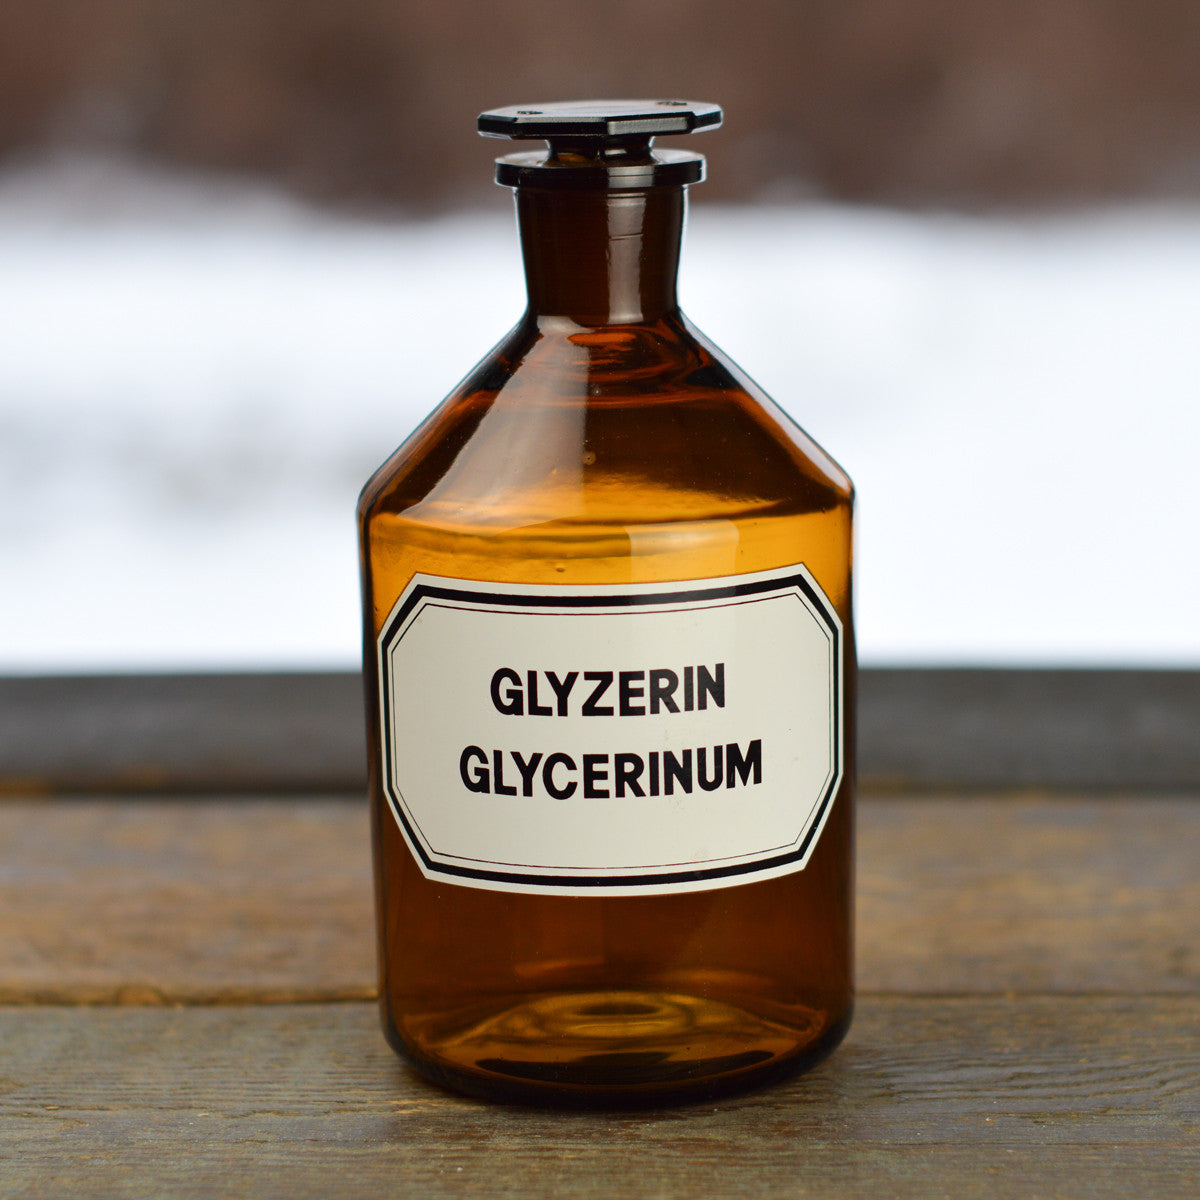 Vintage 1930’s - 1940’s Apothecary Jar with Latin Label GLYZERIN GLYCERINUM and Hexagon Stopper